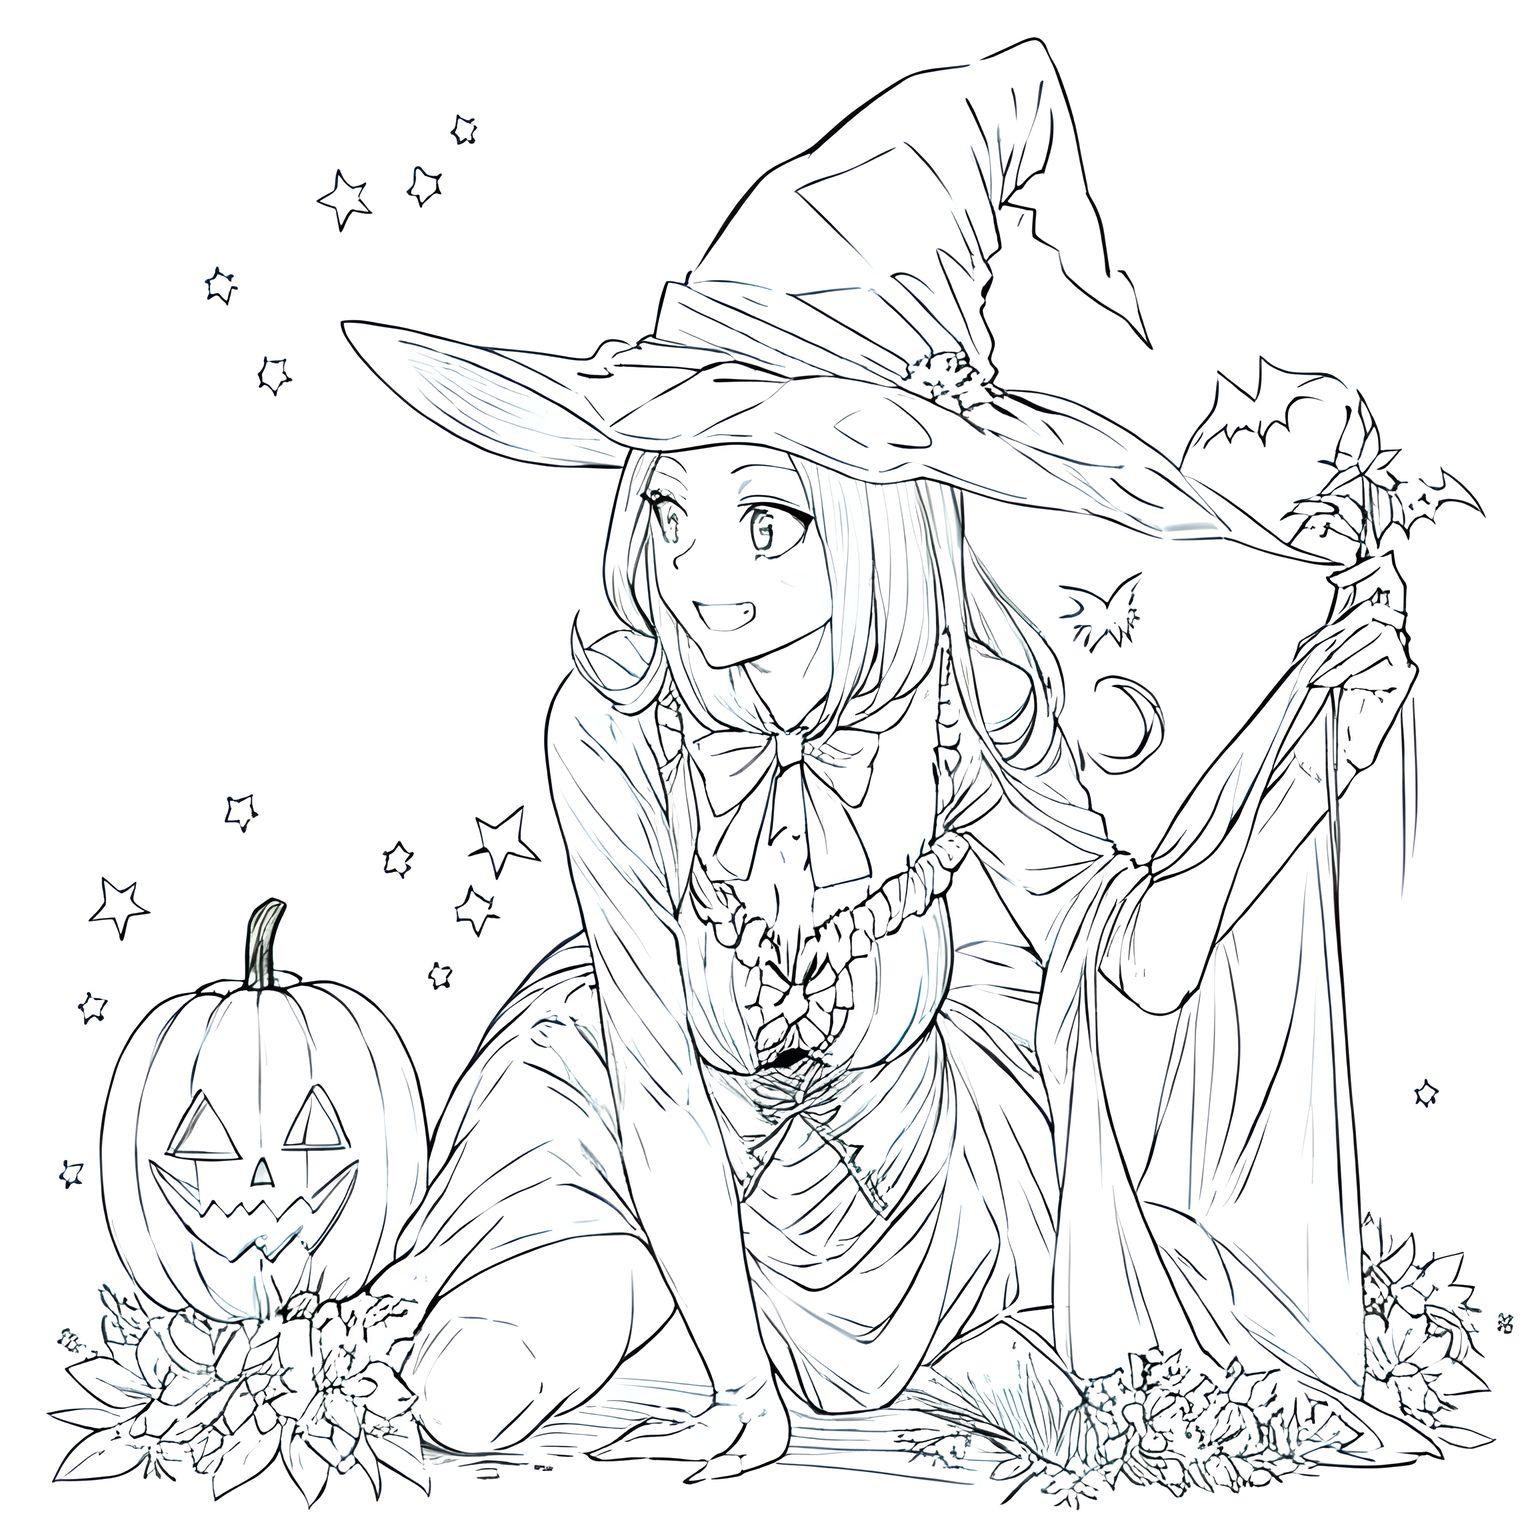 happy halloween witch coloring pages